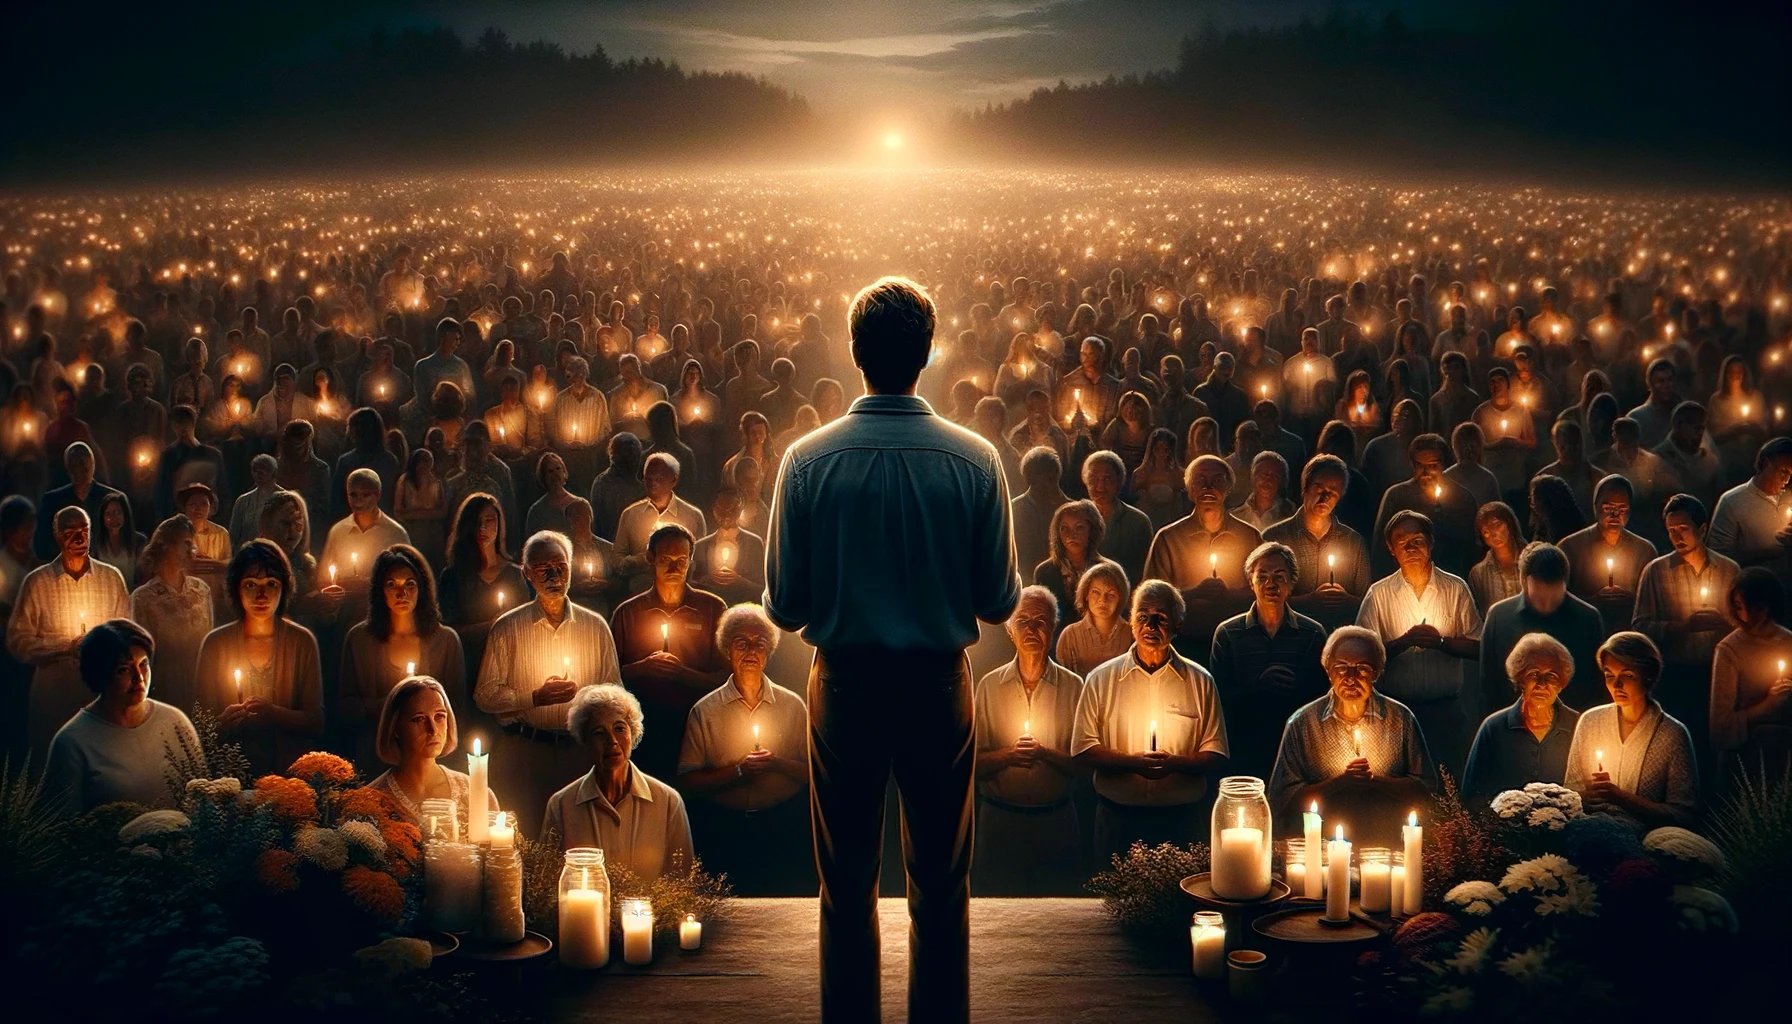 Emotional Marketing - Create an evocative image capturing a solitary man standing before a crowd of people from various walks of life, each with a candle in hand. The setti